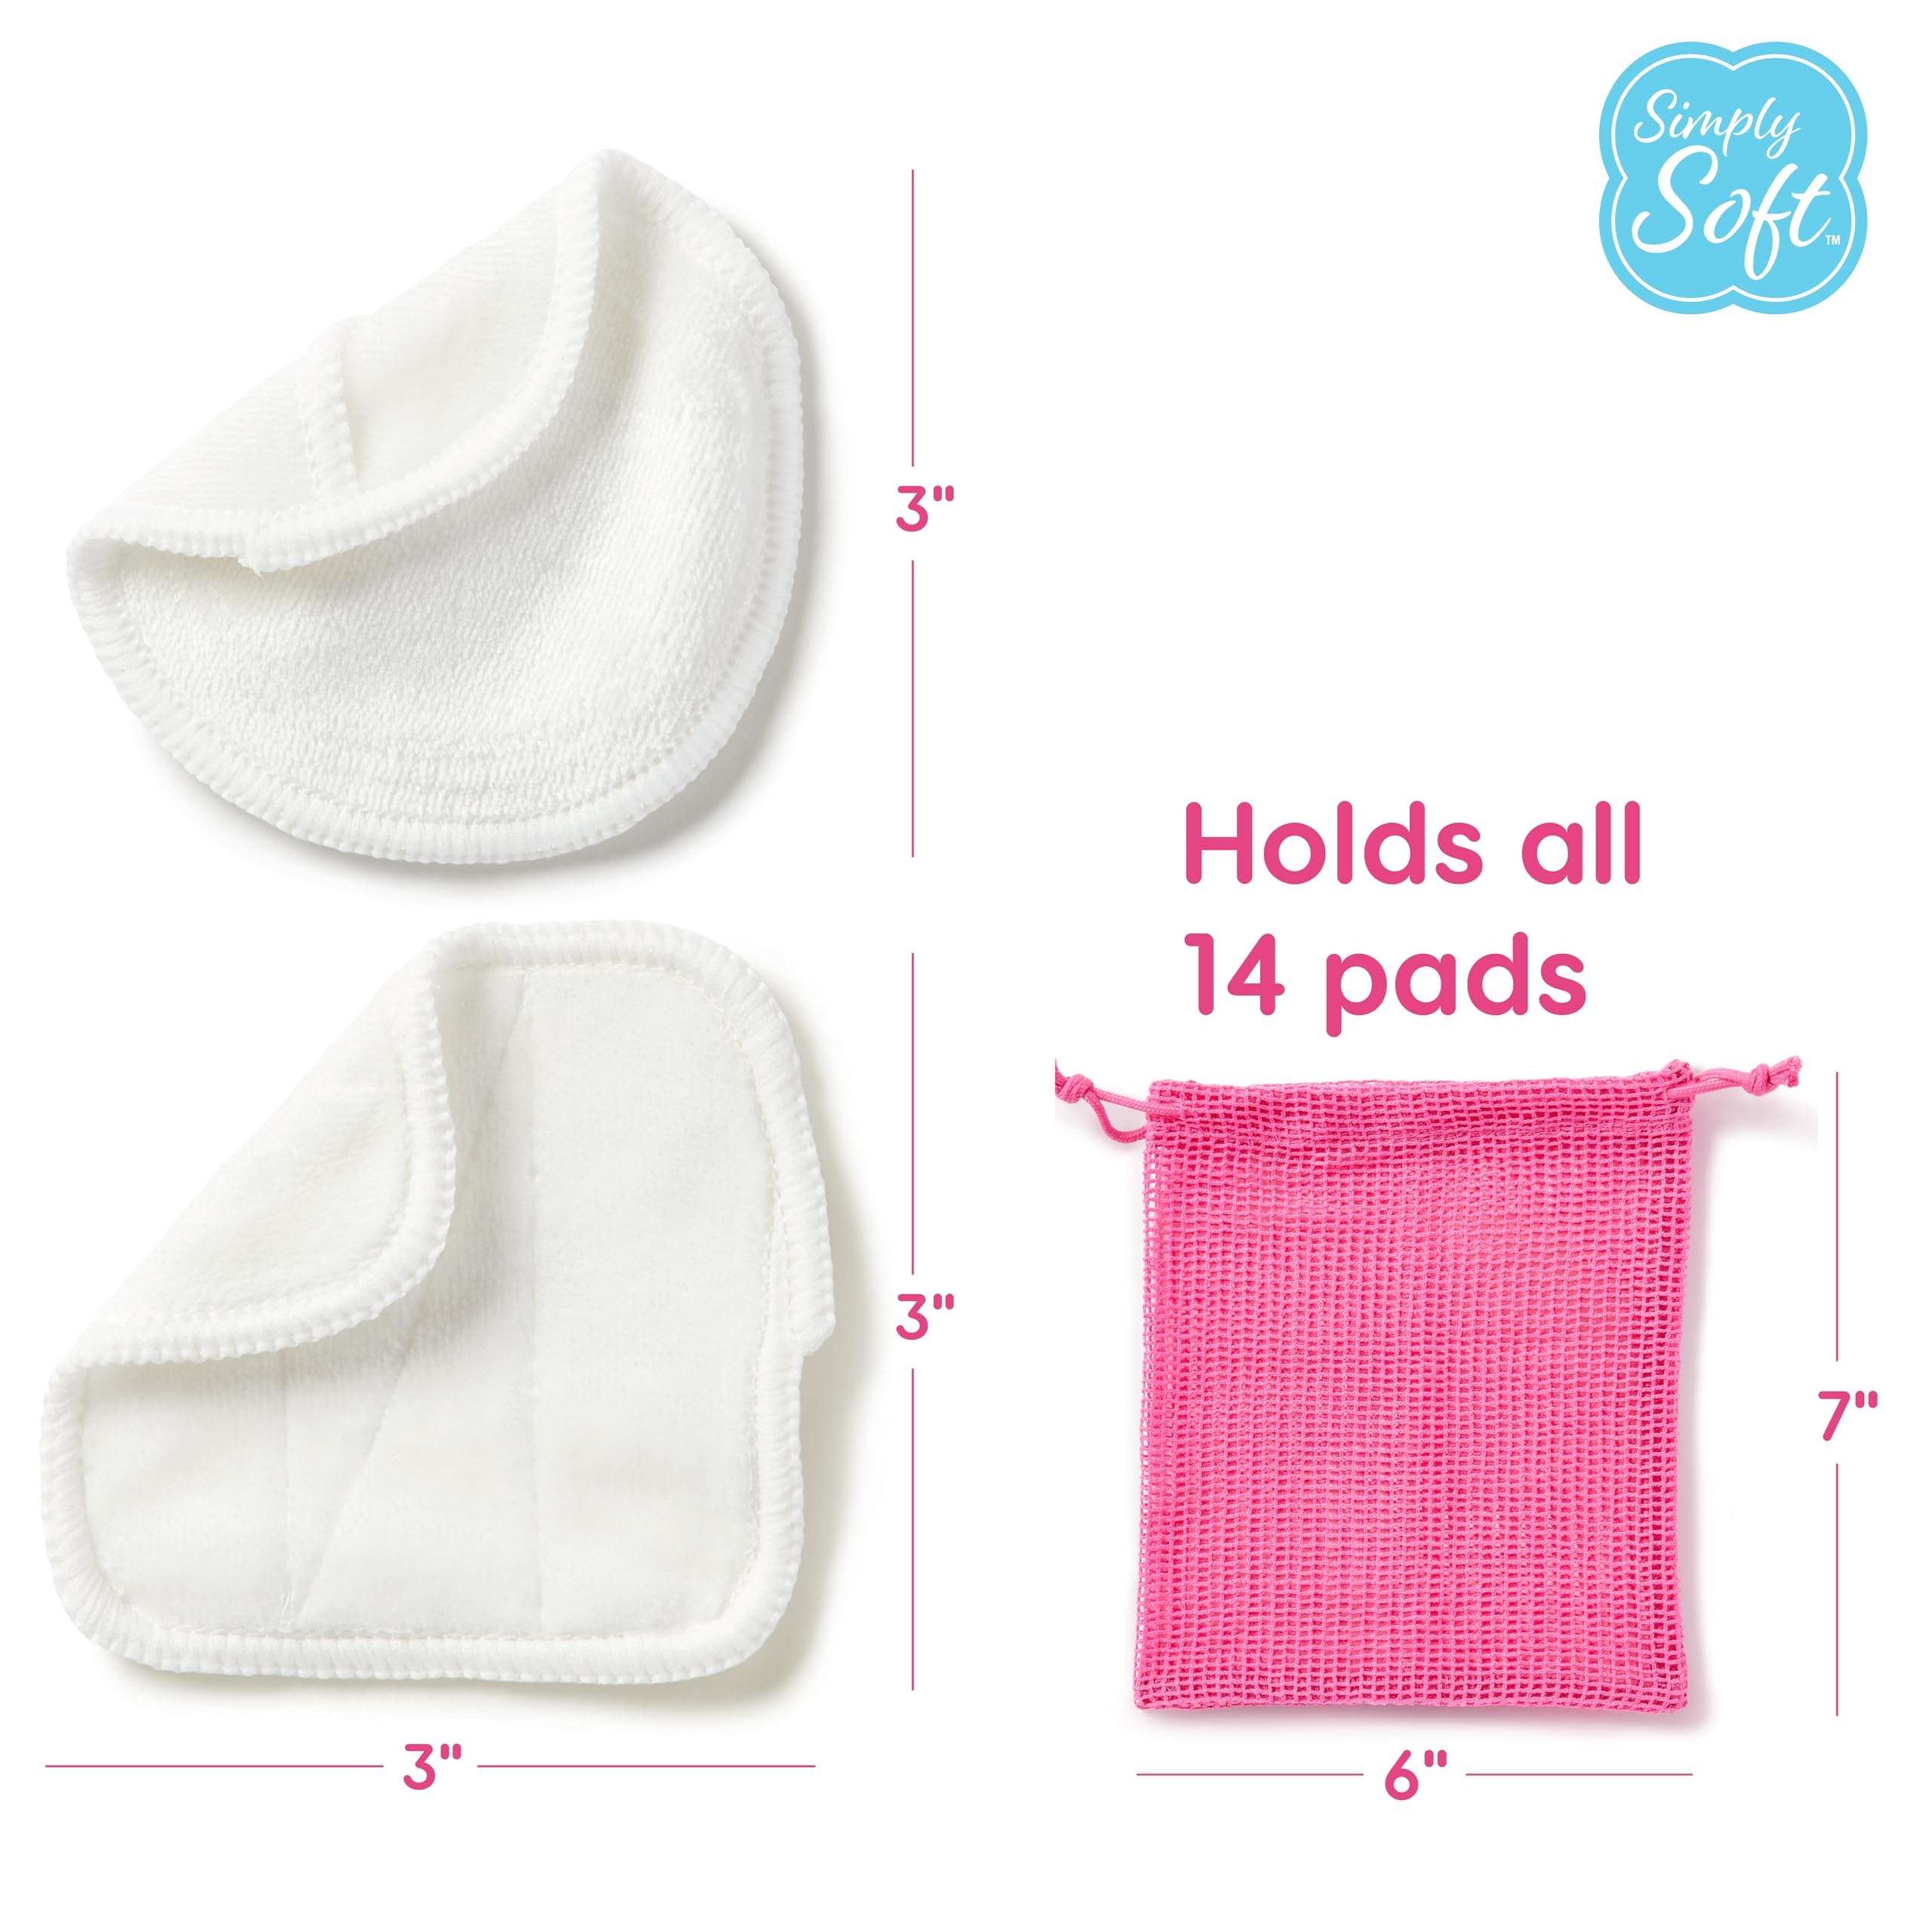 Simply Soft Reusable Cotton Rounds, 14 Count, Makeup Remover Pads for All Skin Types, Sustainable, Minimizes Waste, Dermatologically Tested (7 Rounds and 7 Squares with 1 Washable Mesh Bag)